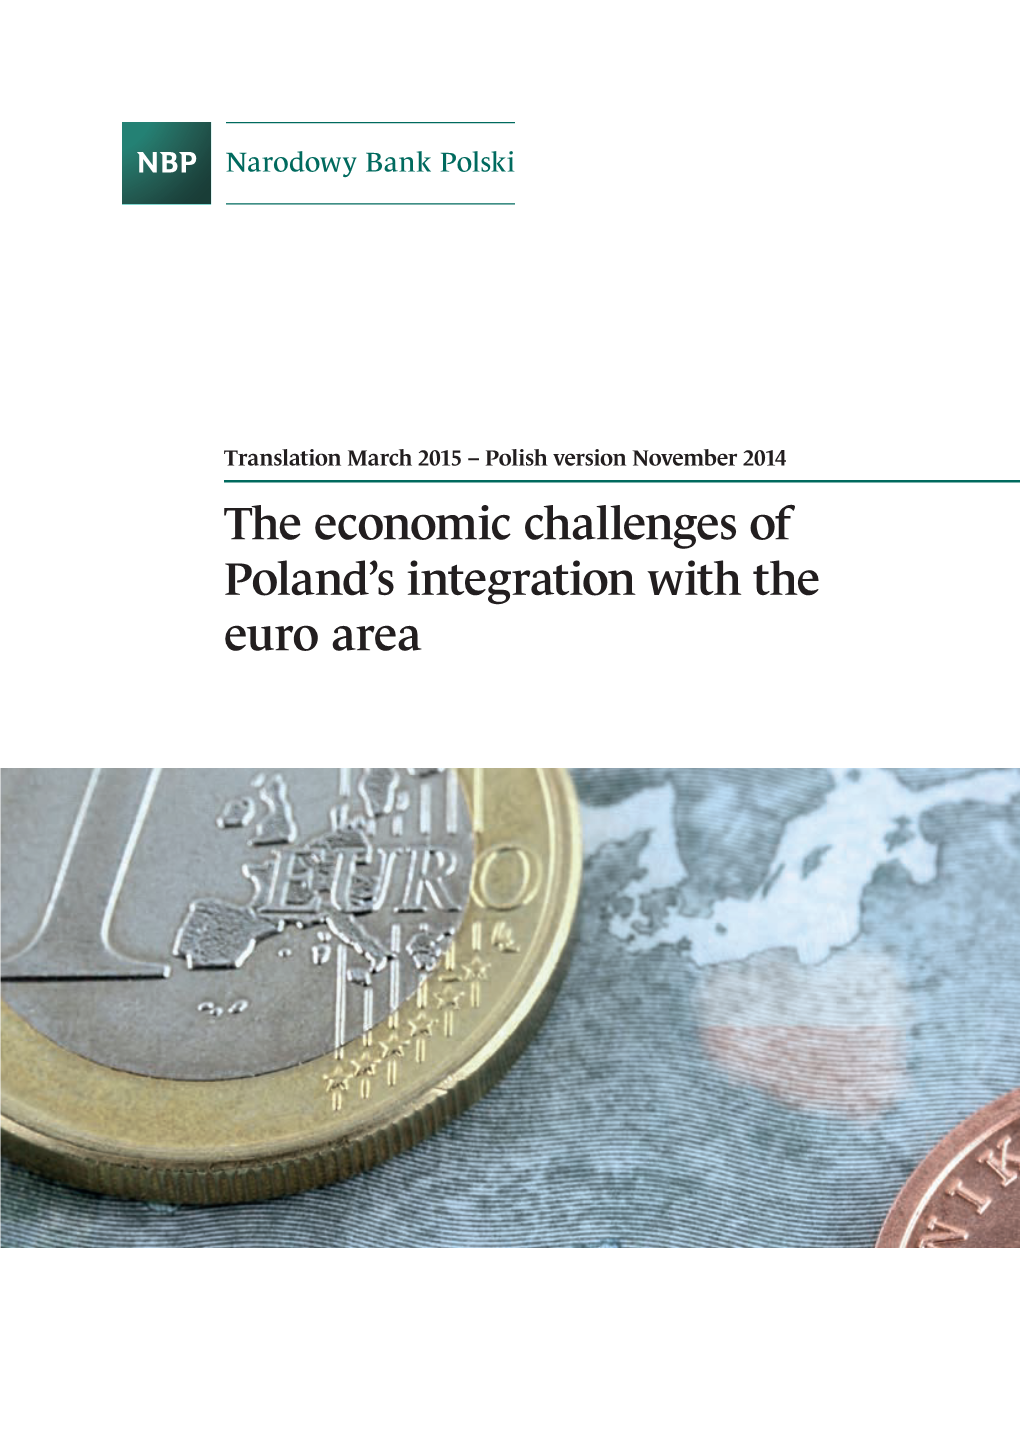 The Economic Challenges of Poland's Integration with the Euro Area